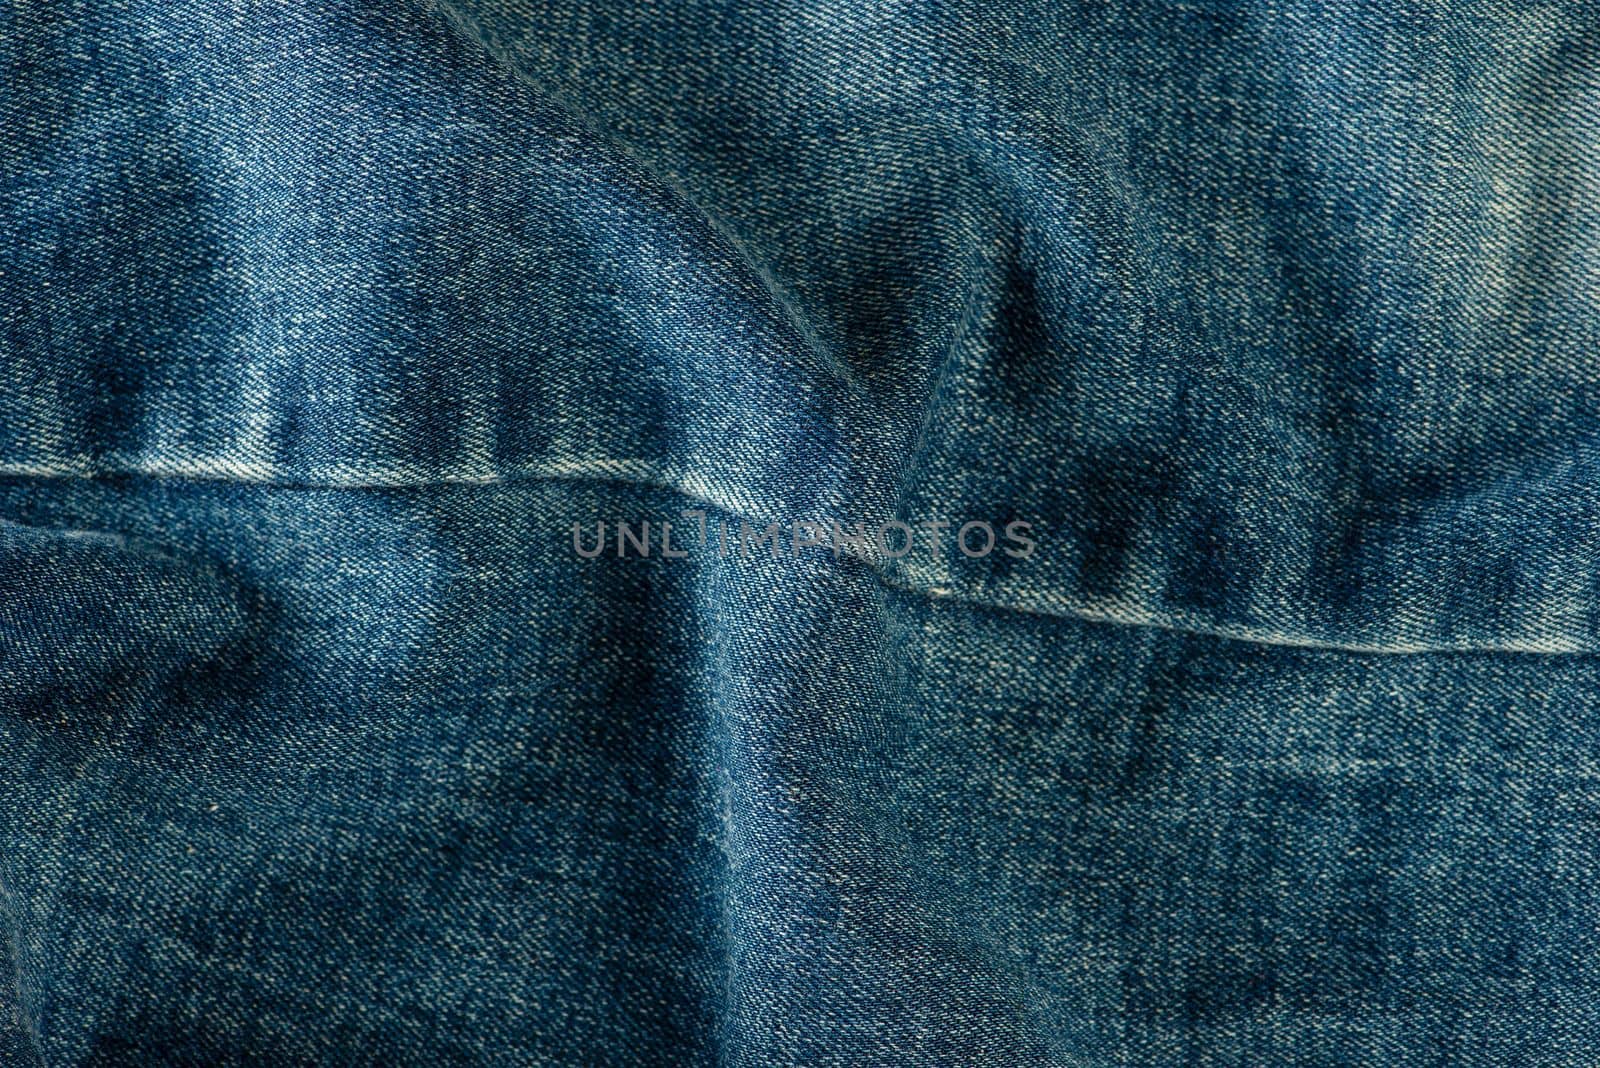 Texture of denim close-up. Jeans seam with place for text.